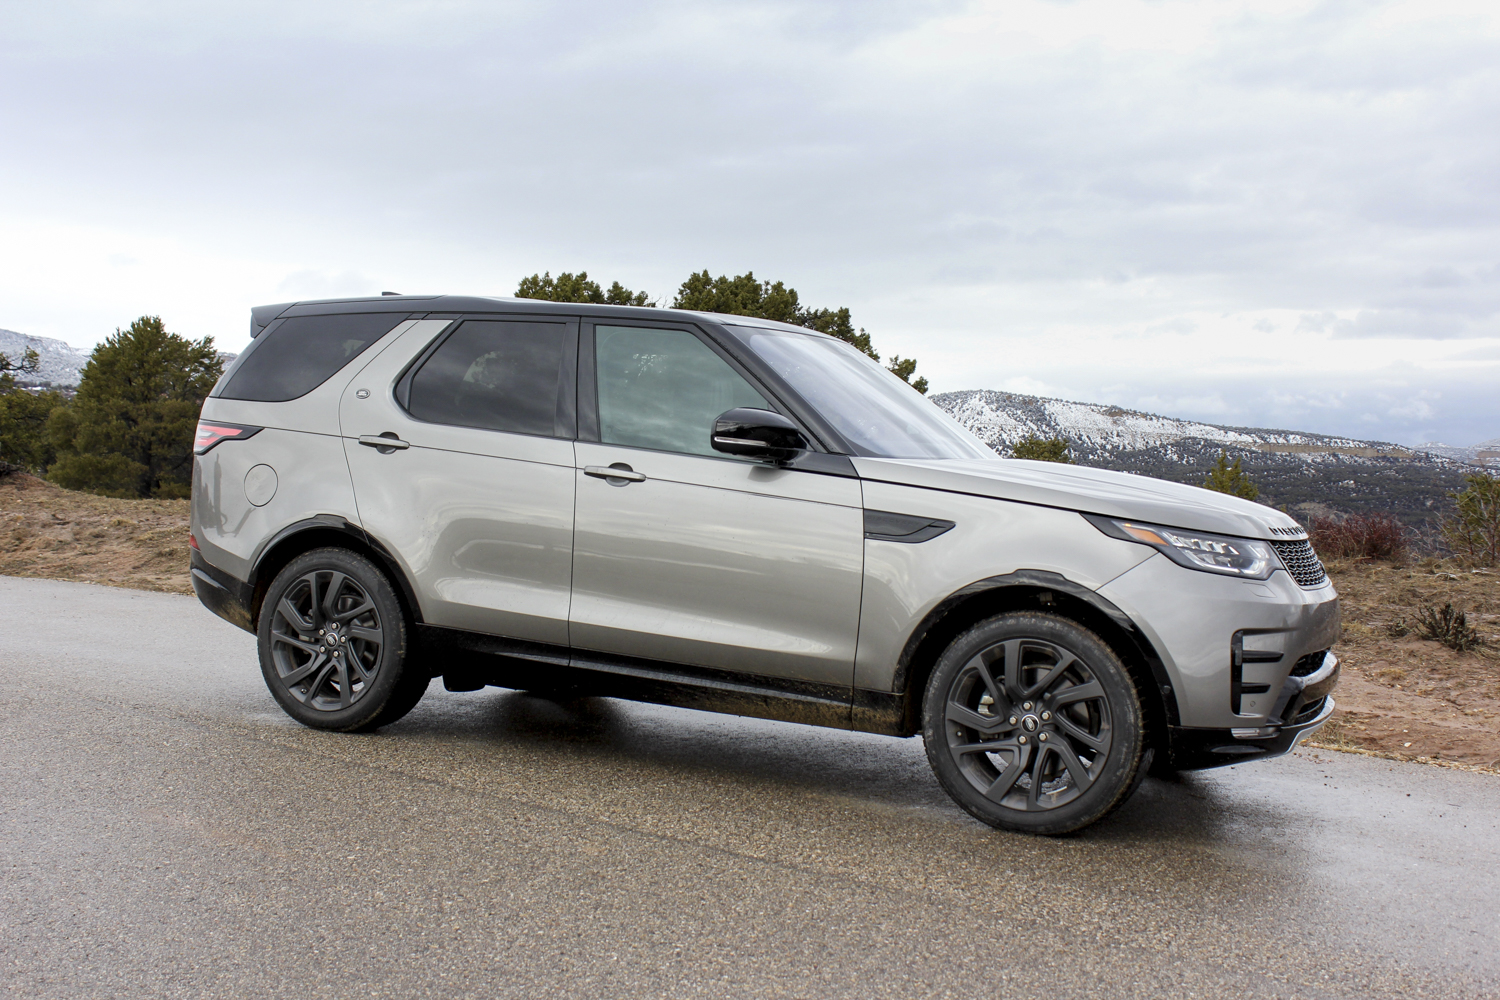 2017 land rover discovery first drive landrover review 000117